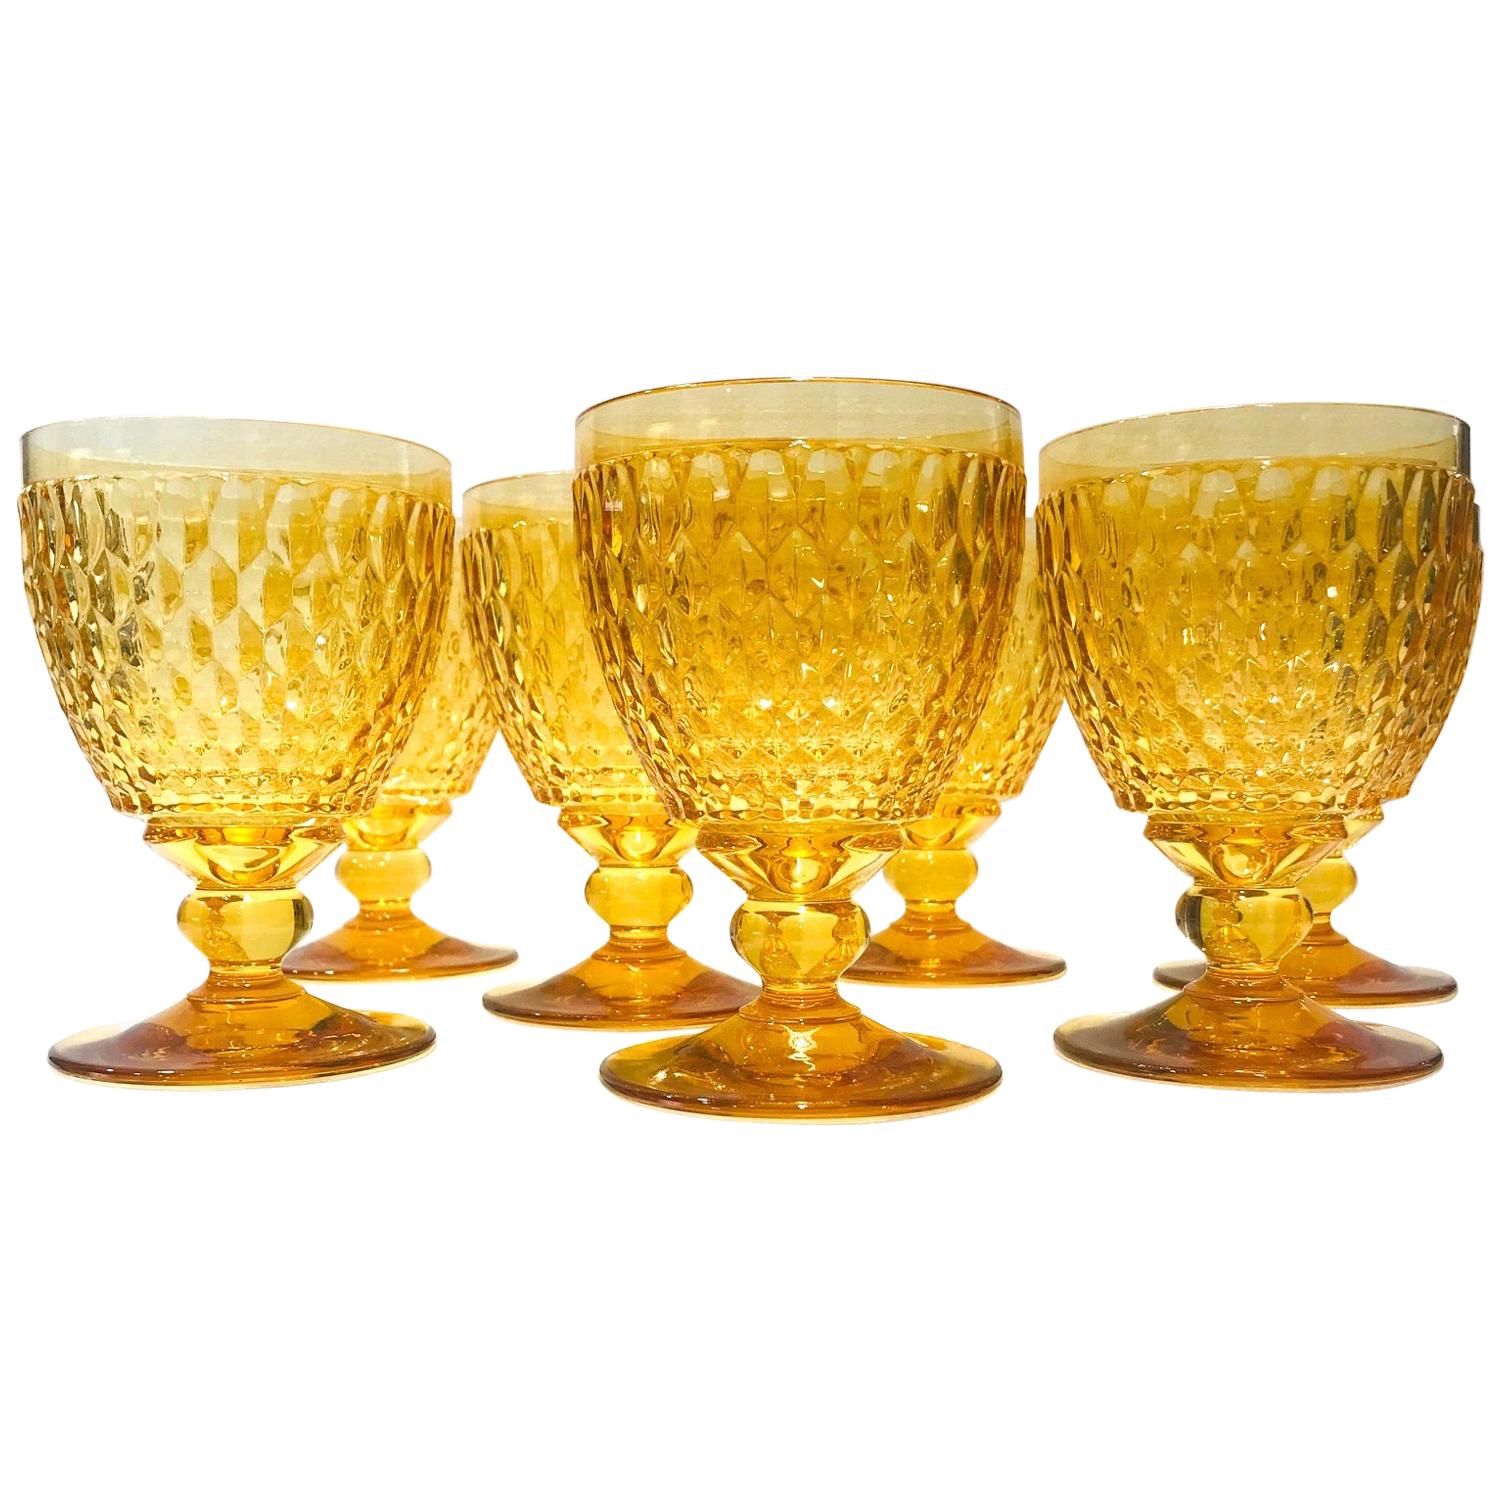 Set of Eight Villeroy & Boch Crystal Water Goblets in Amber Yellow, circa 2000